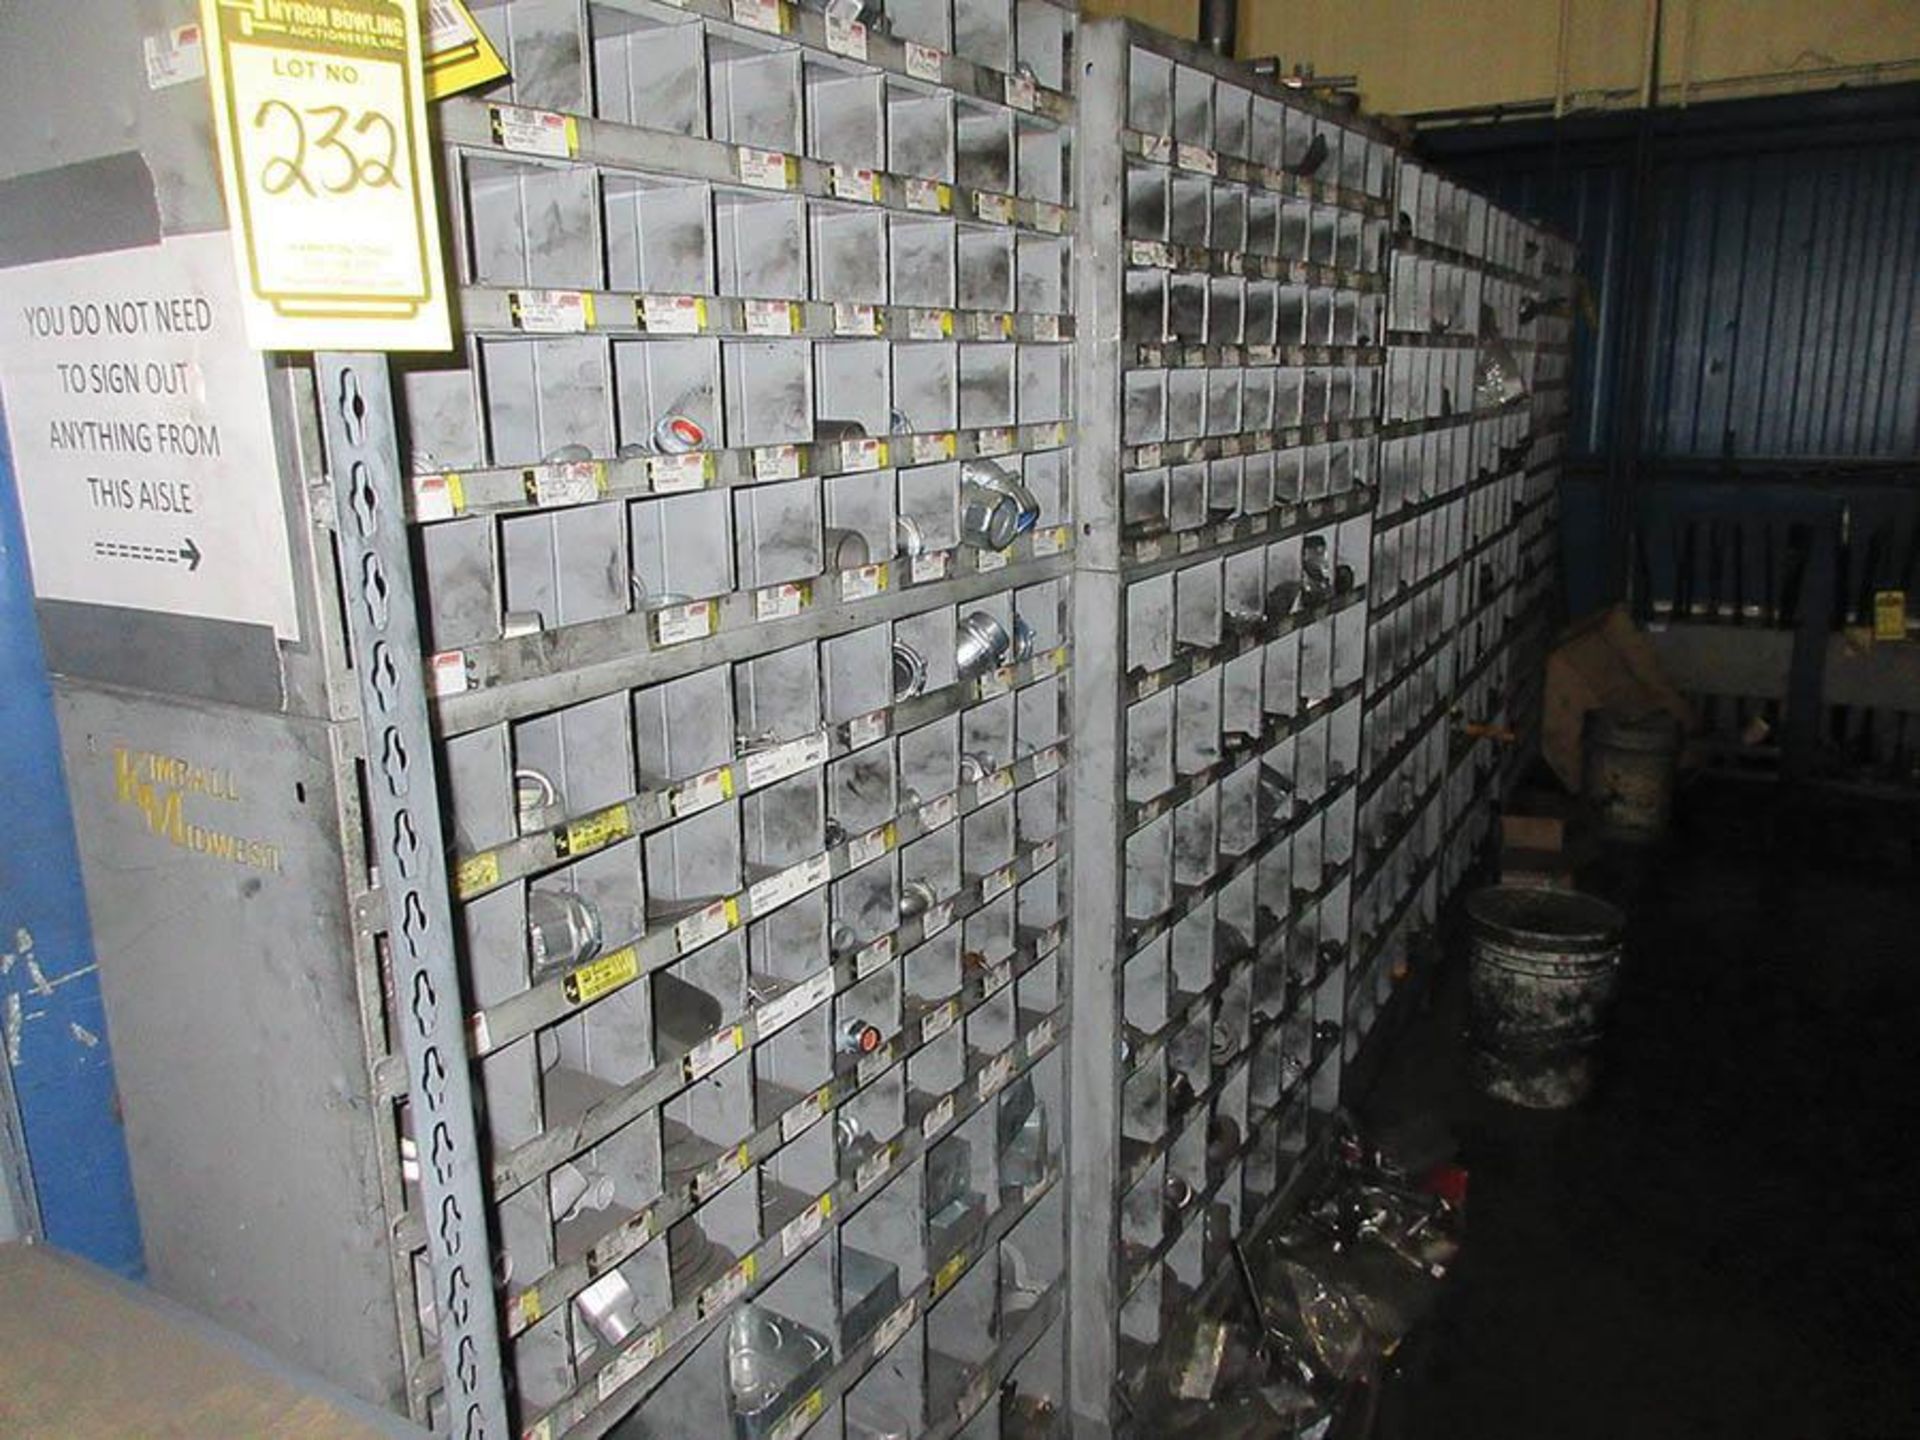 (5) KM PIGEON HOLE CABINETS W/ ASSORTED HARDWARE CONTENT, (1) 5-SHELF UNIT W/ CONTENT